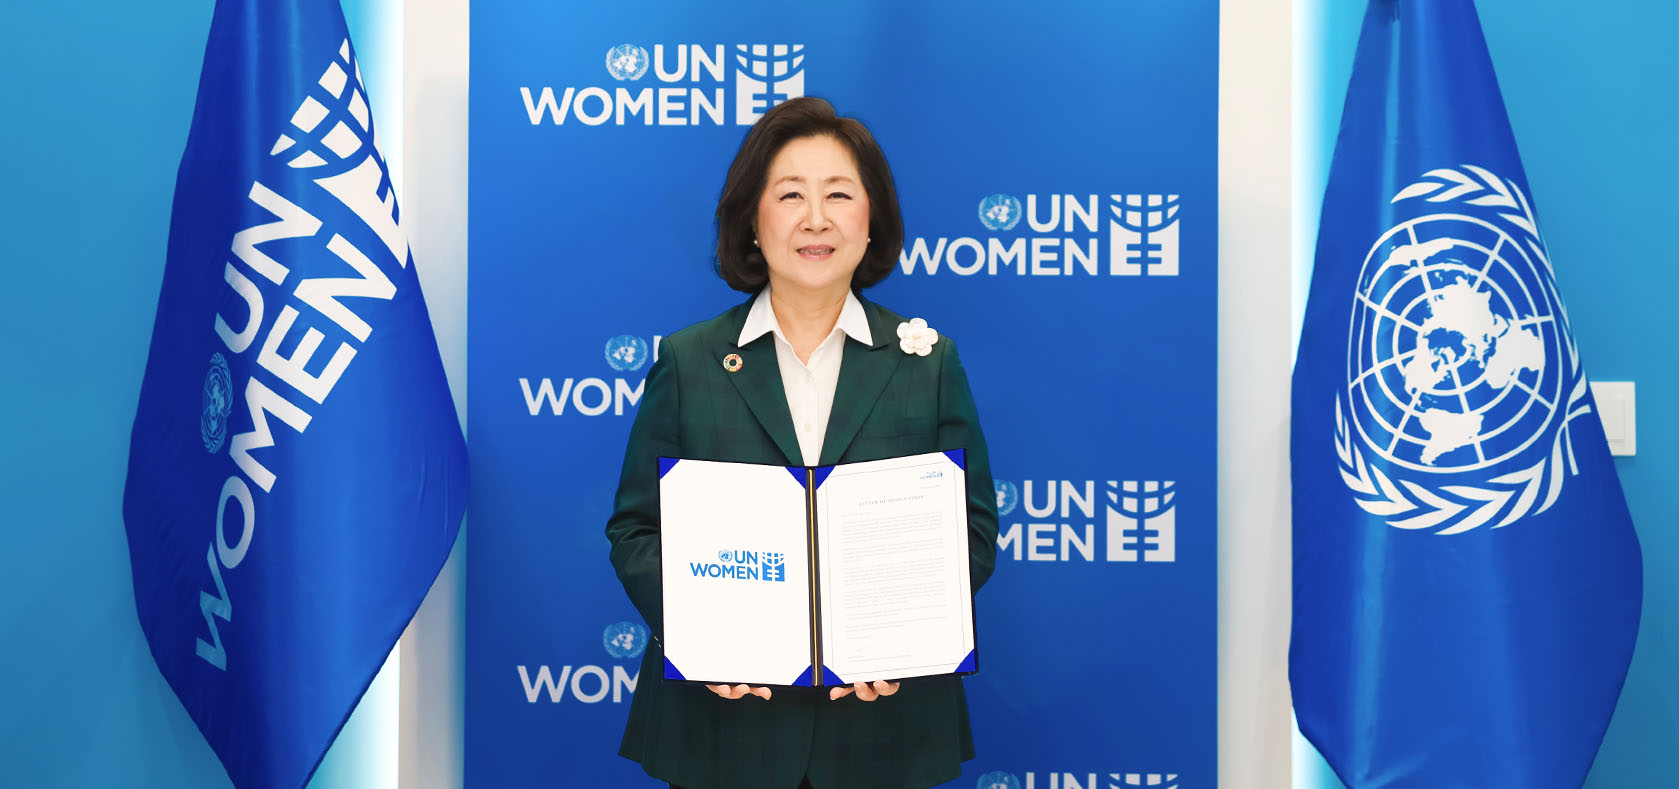 Eun Mee Kim, President of Ewha Womans University, holding the letter of designation as the UN Women National Goodwill Ambassador for the Republic of Korea.